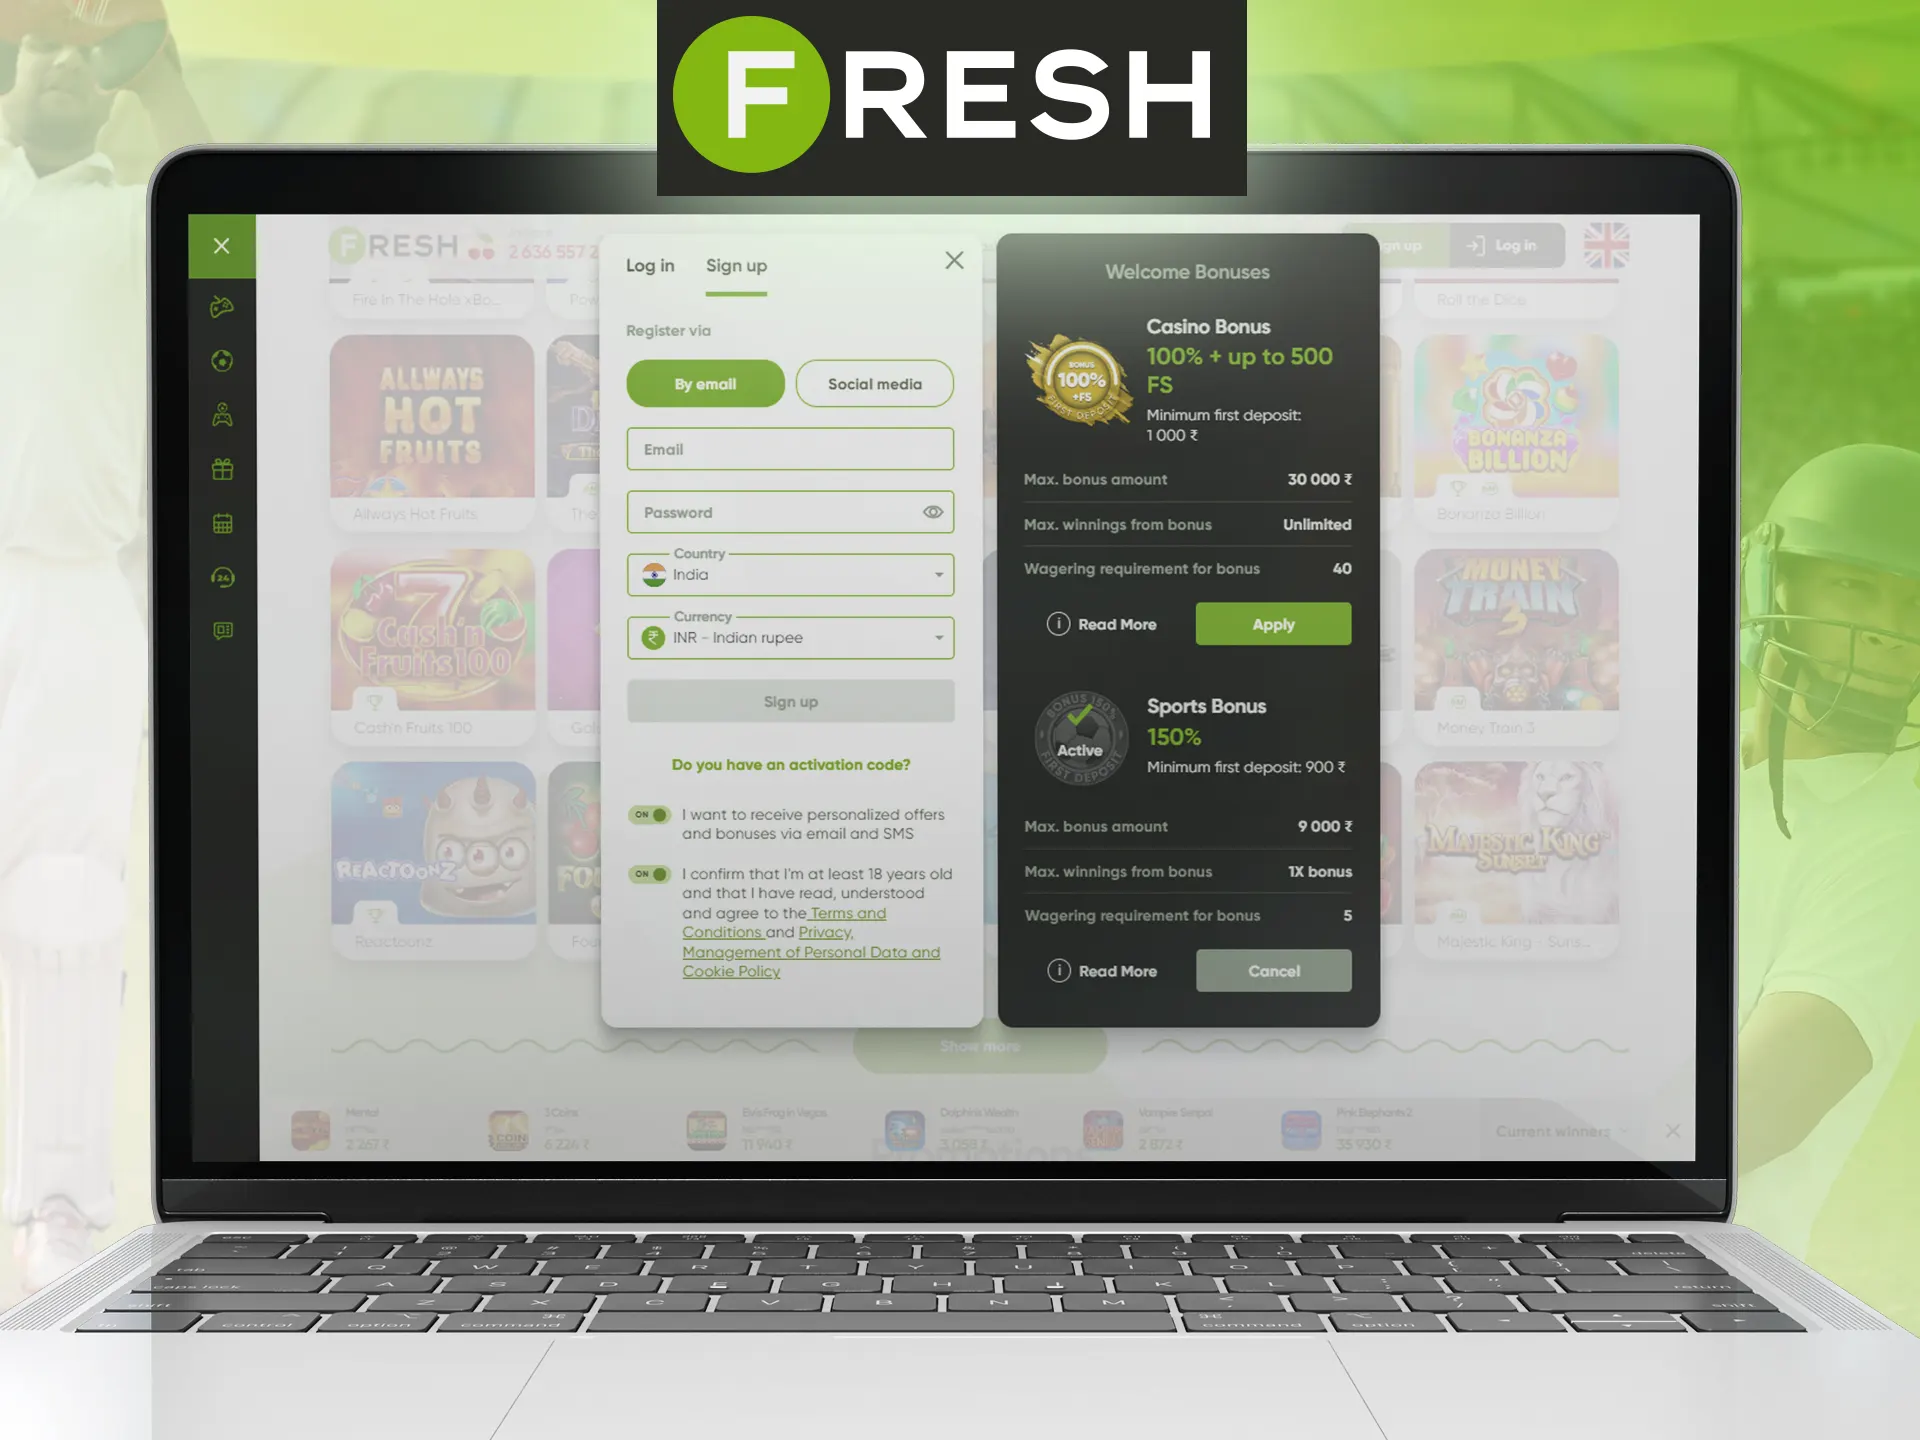 Click on the registration button and start registration of the Fresh Casino account.